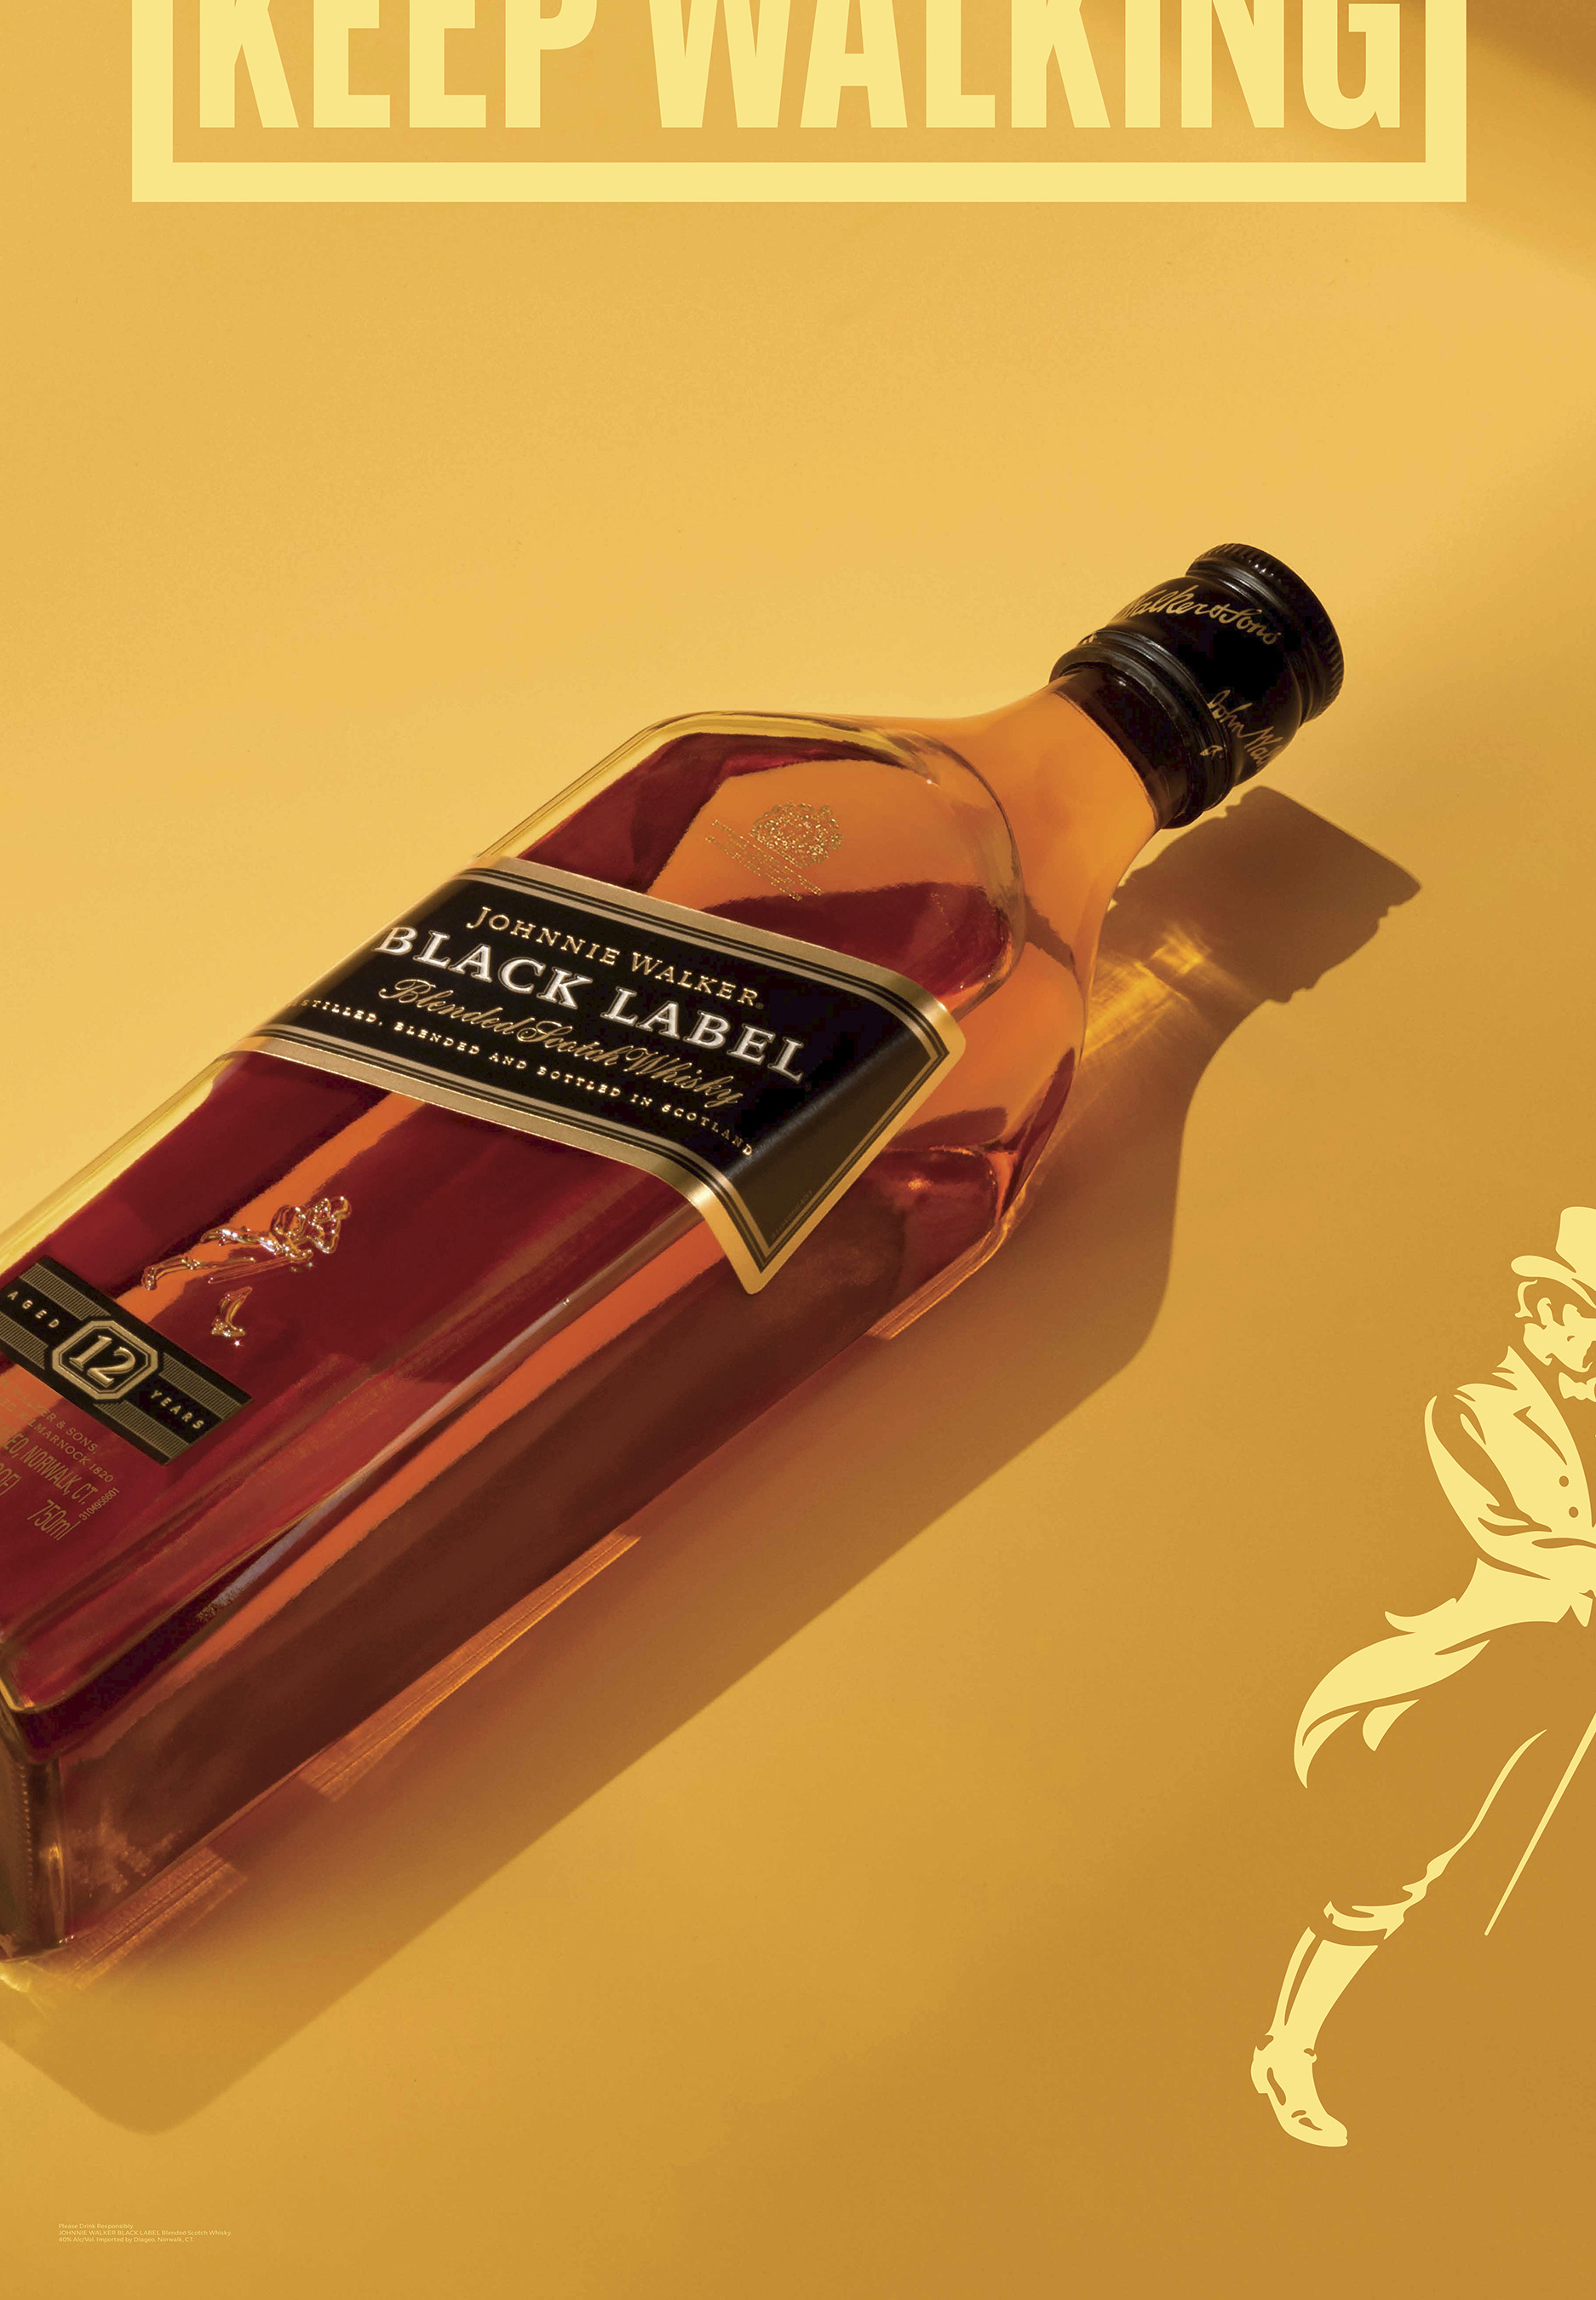 Johnnie Walker reveals a vibrant creative world as part of its Keep Walking campaign.